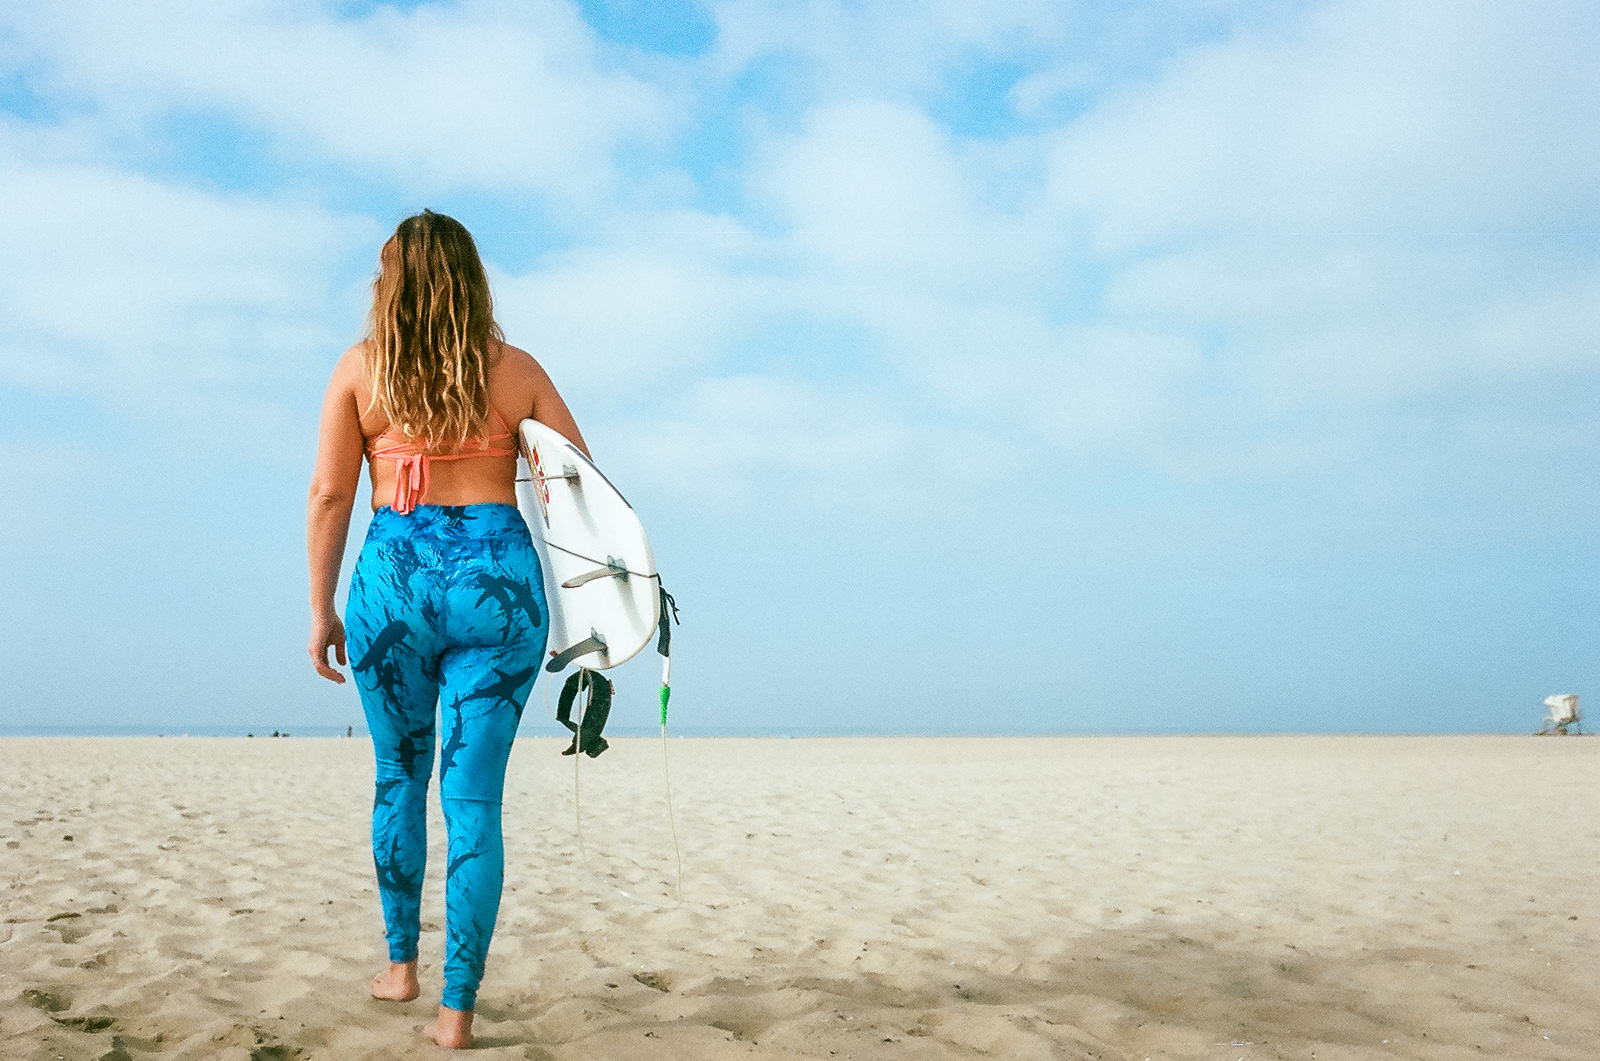 35mm color film Surfing photo shoot at Huntington State Beach with girl surfer for Get wise fool eco-friendly surf company